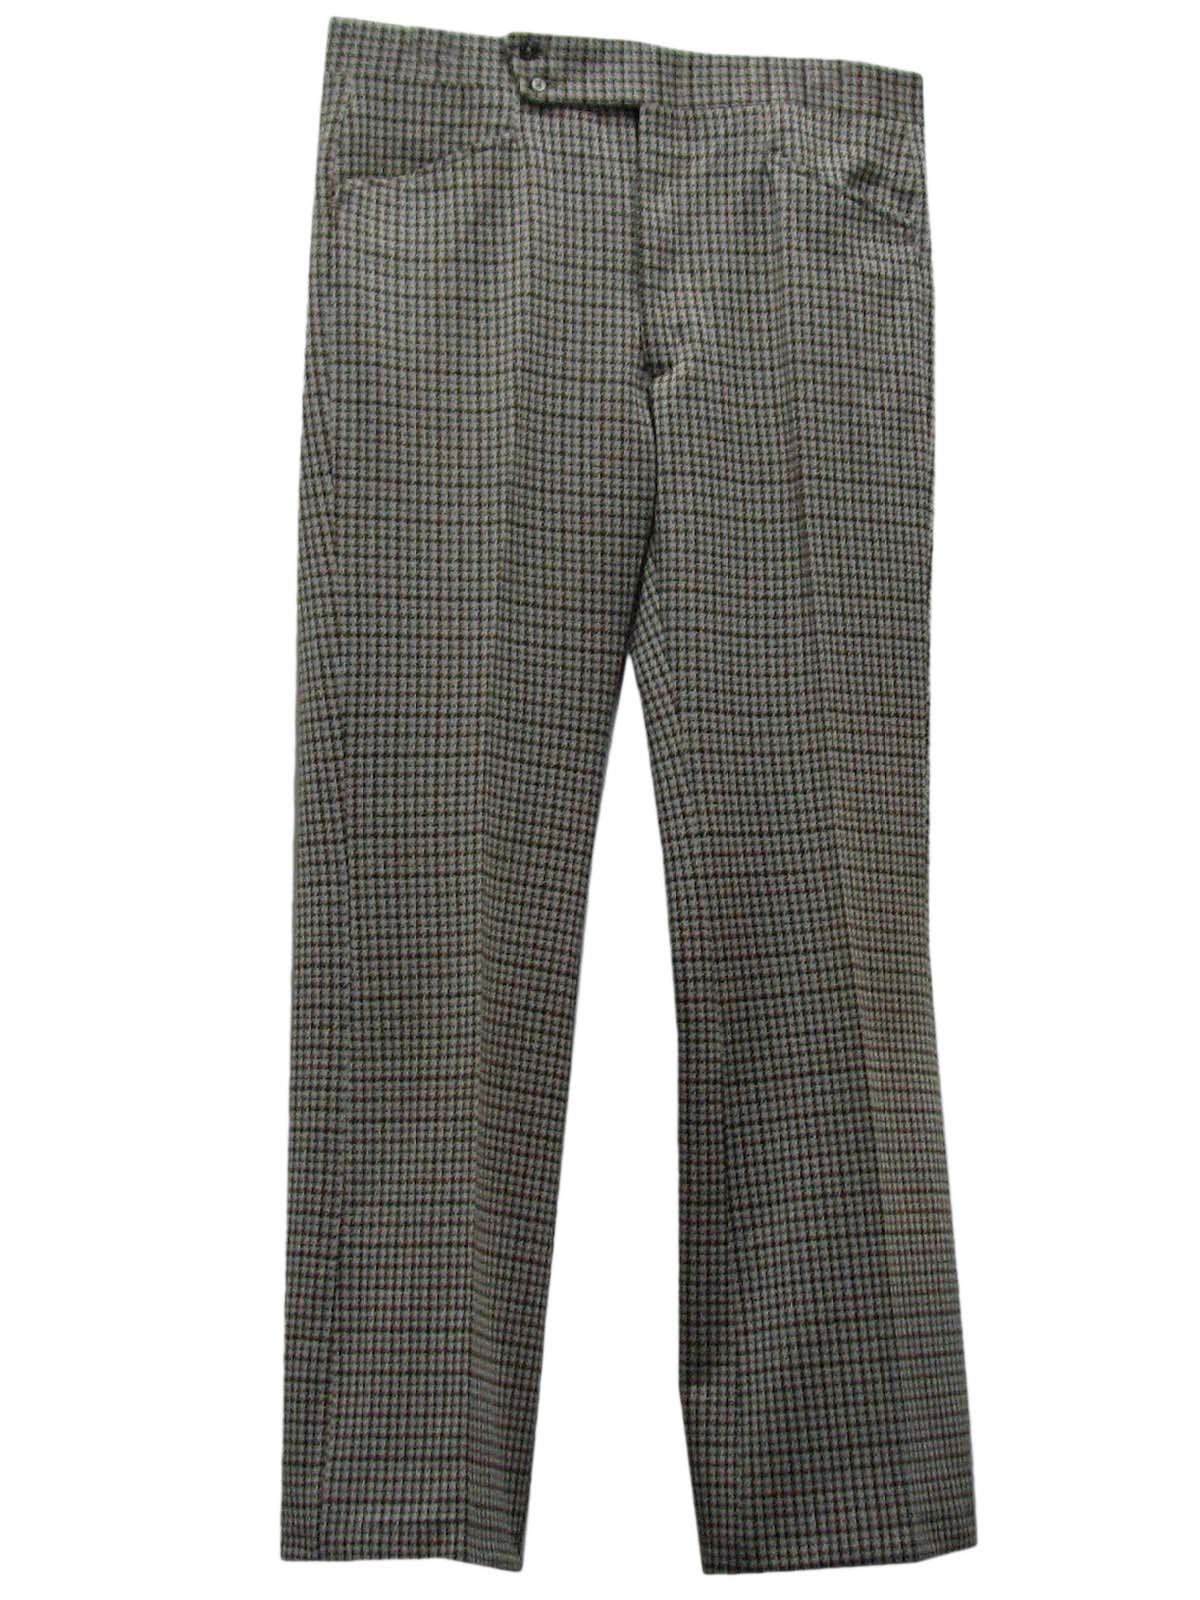 70s Retro Pants: 70s -Haggar- Mens houndstooth polyester doubleknit ...